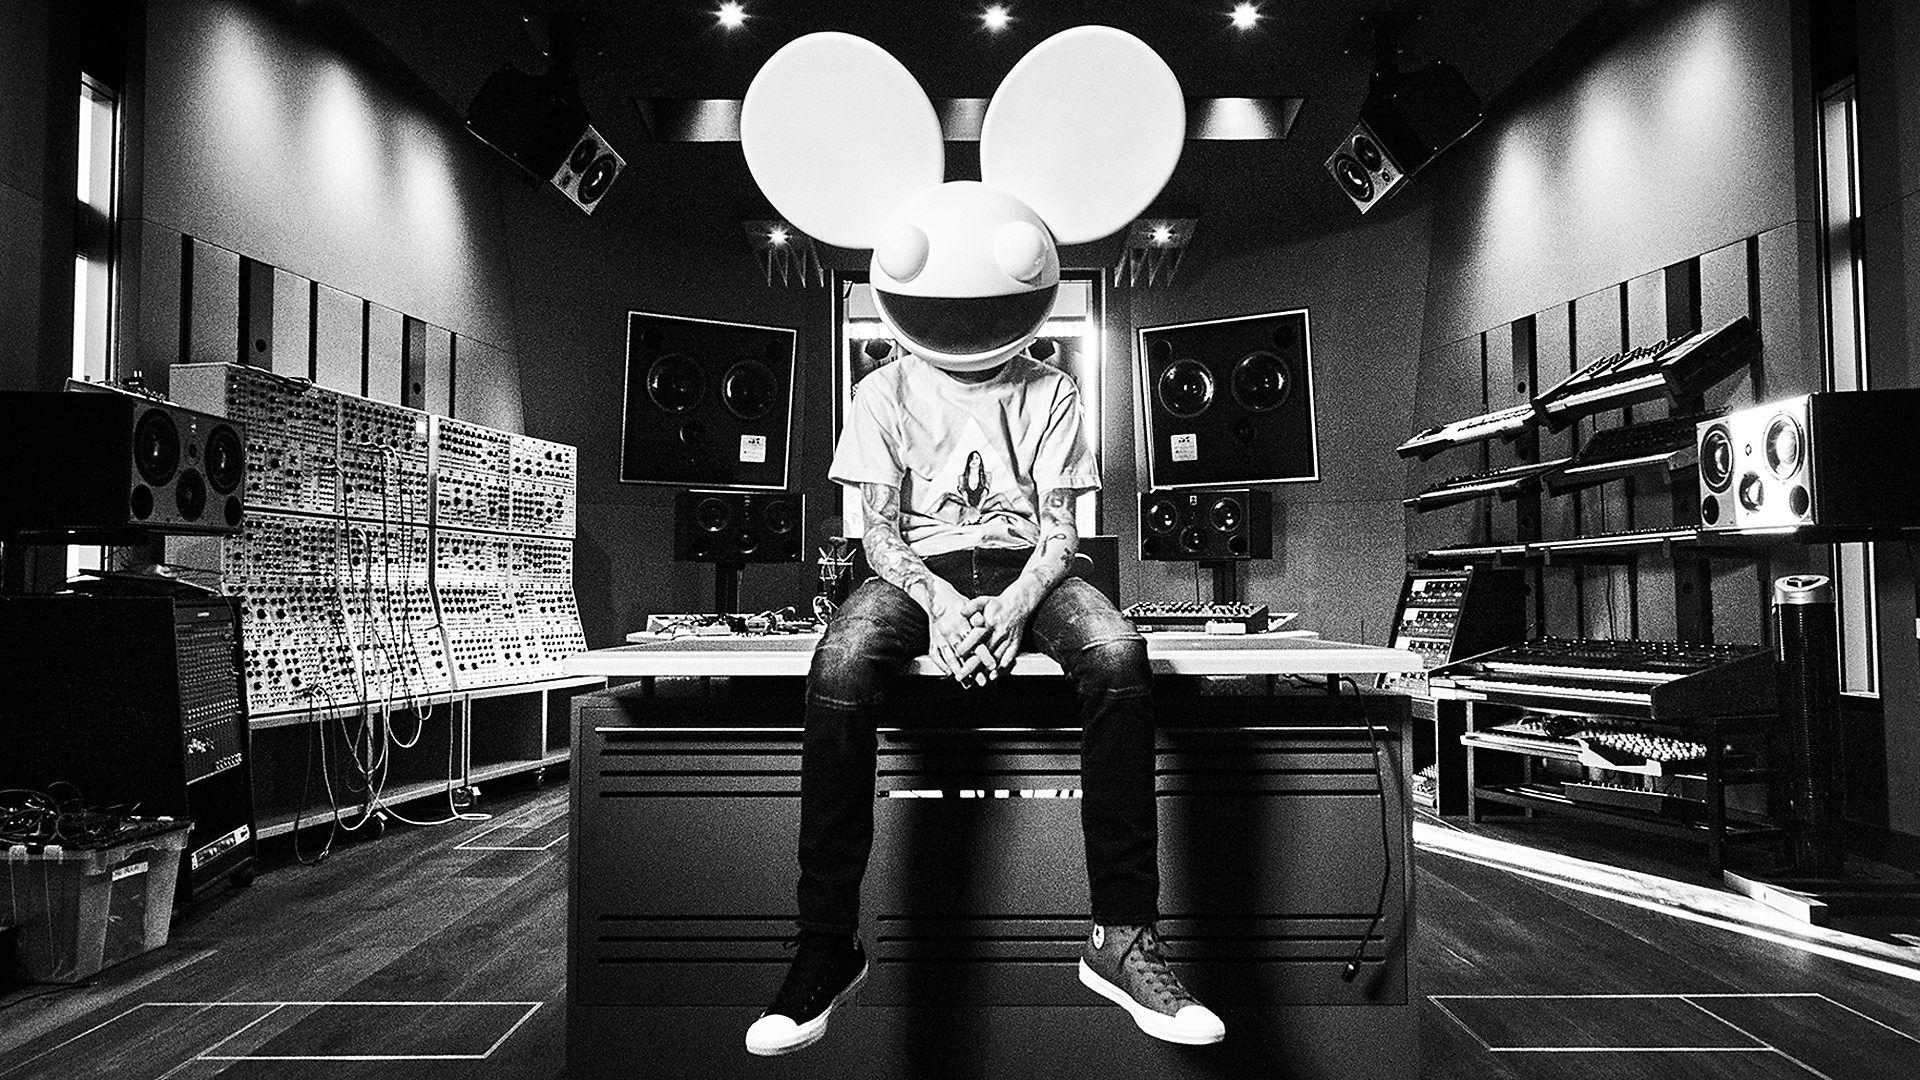 Deadmau5 confirms new album in 2018 and new podcast